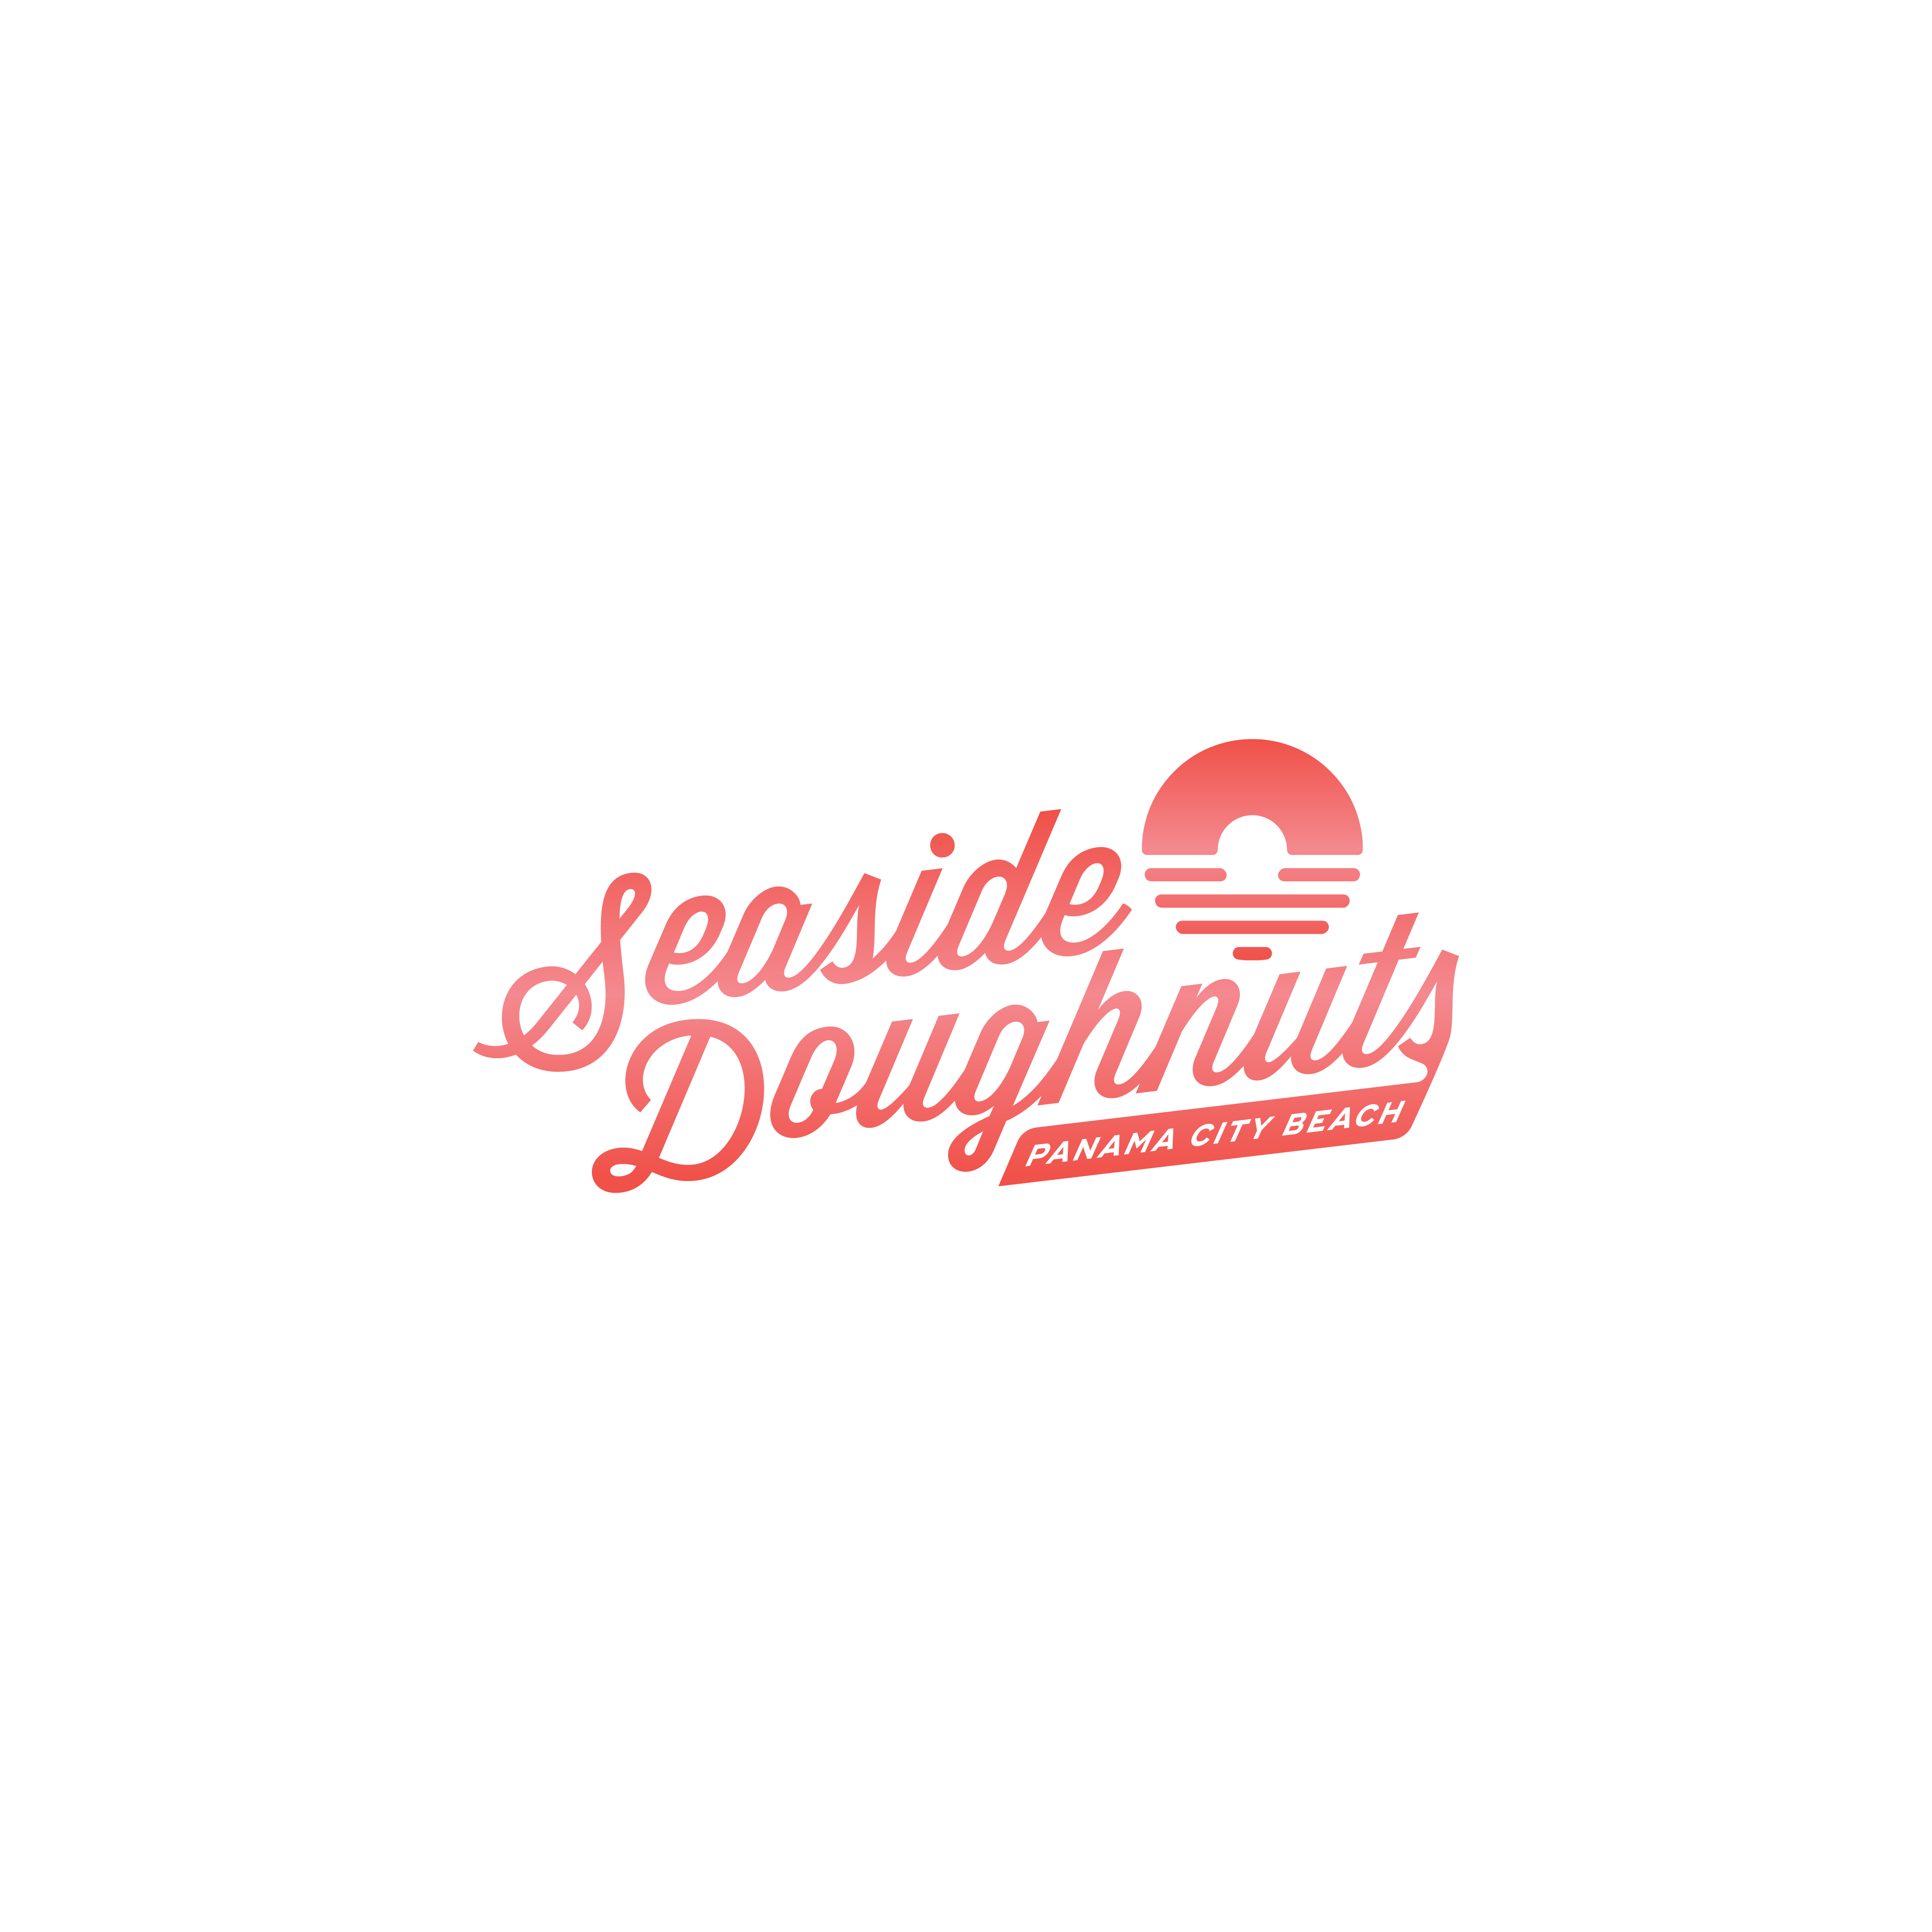 Seaside Doughnuts logo design by logo designer Always Abounding for your inspiration and for the worlds largest logo competition